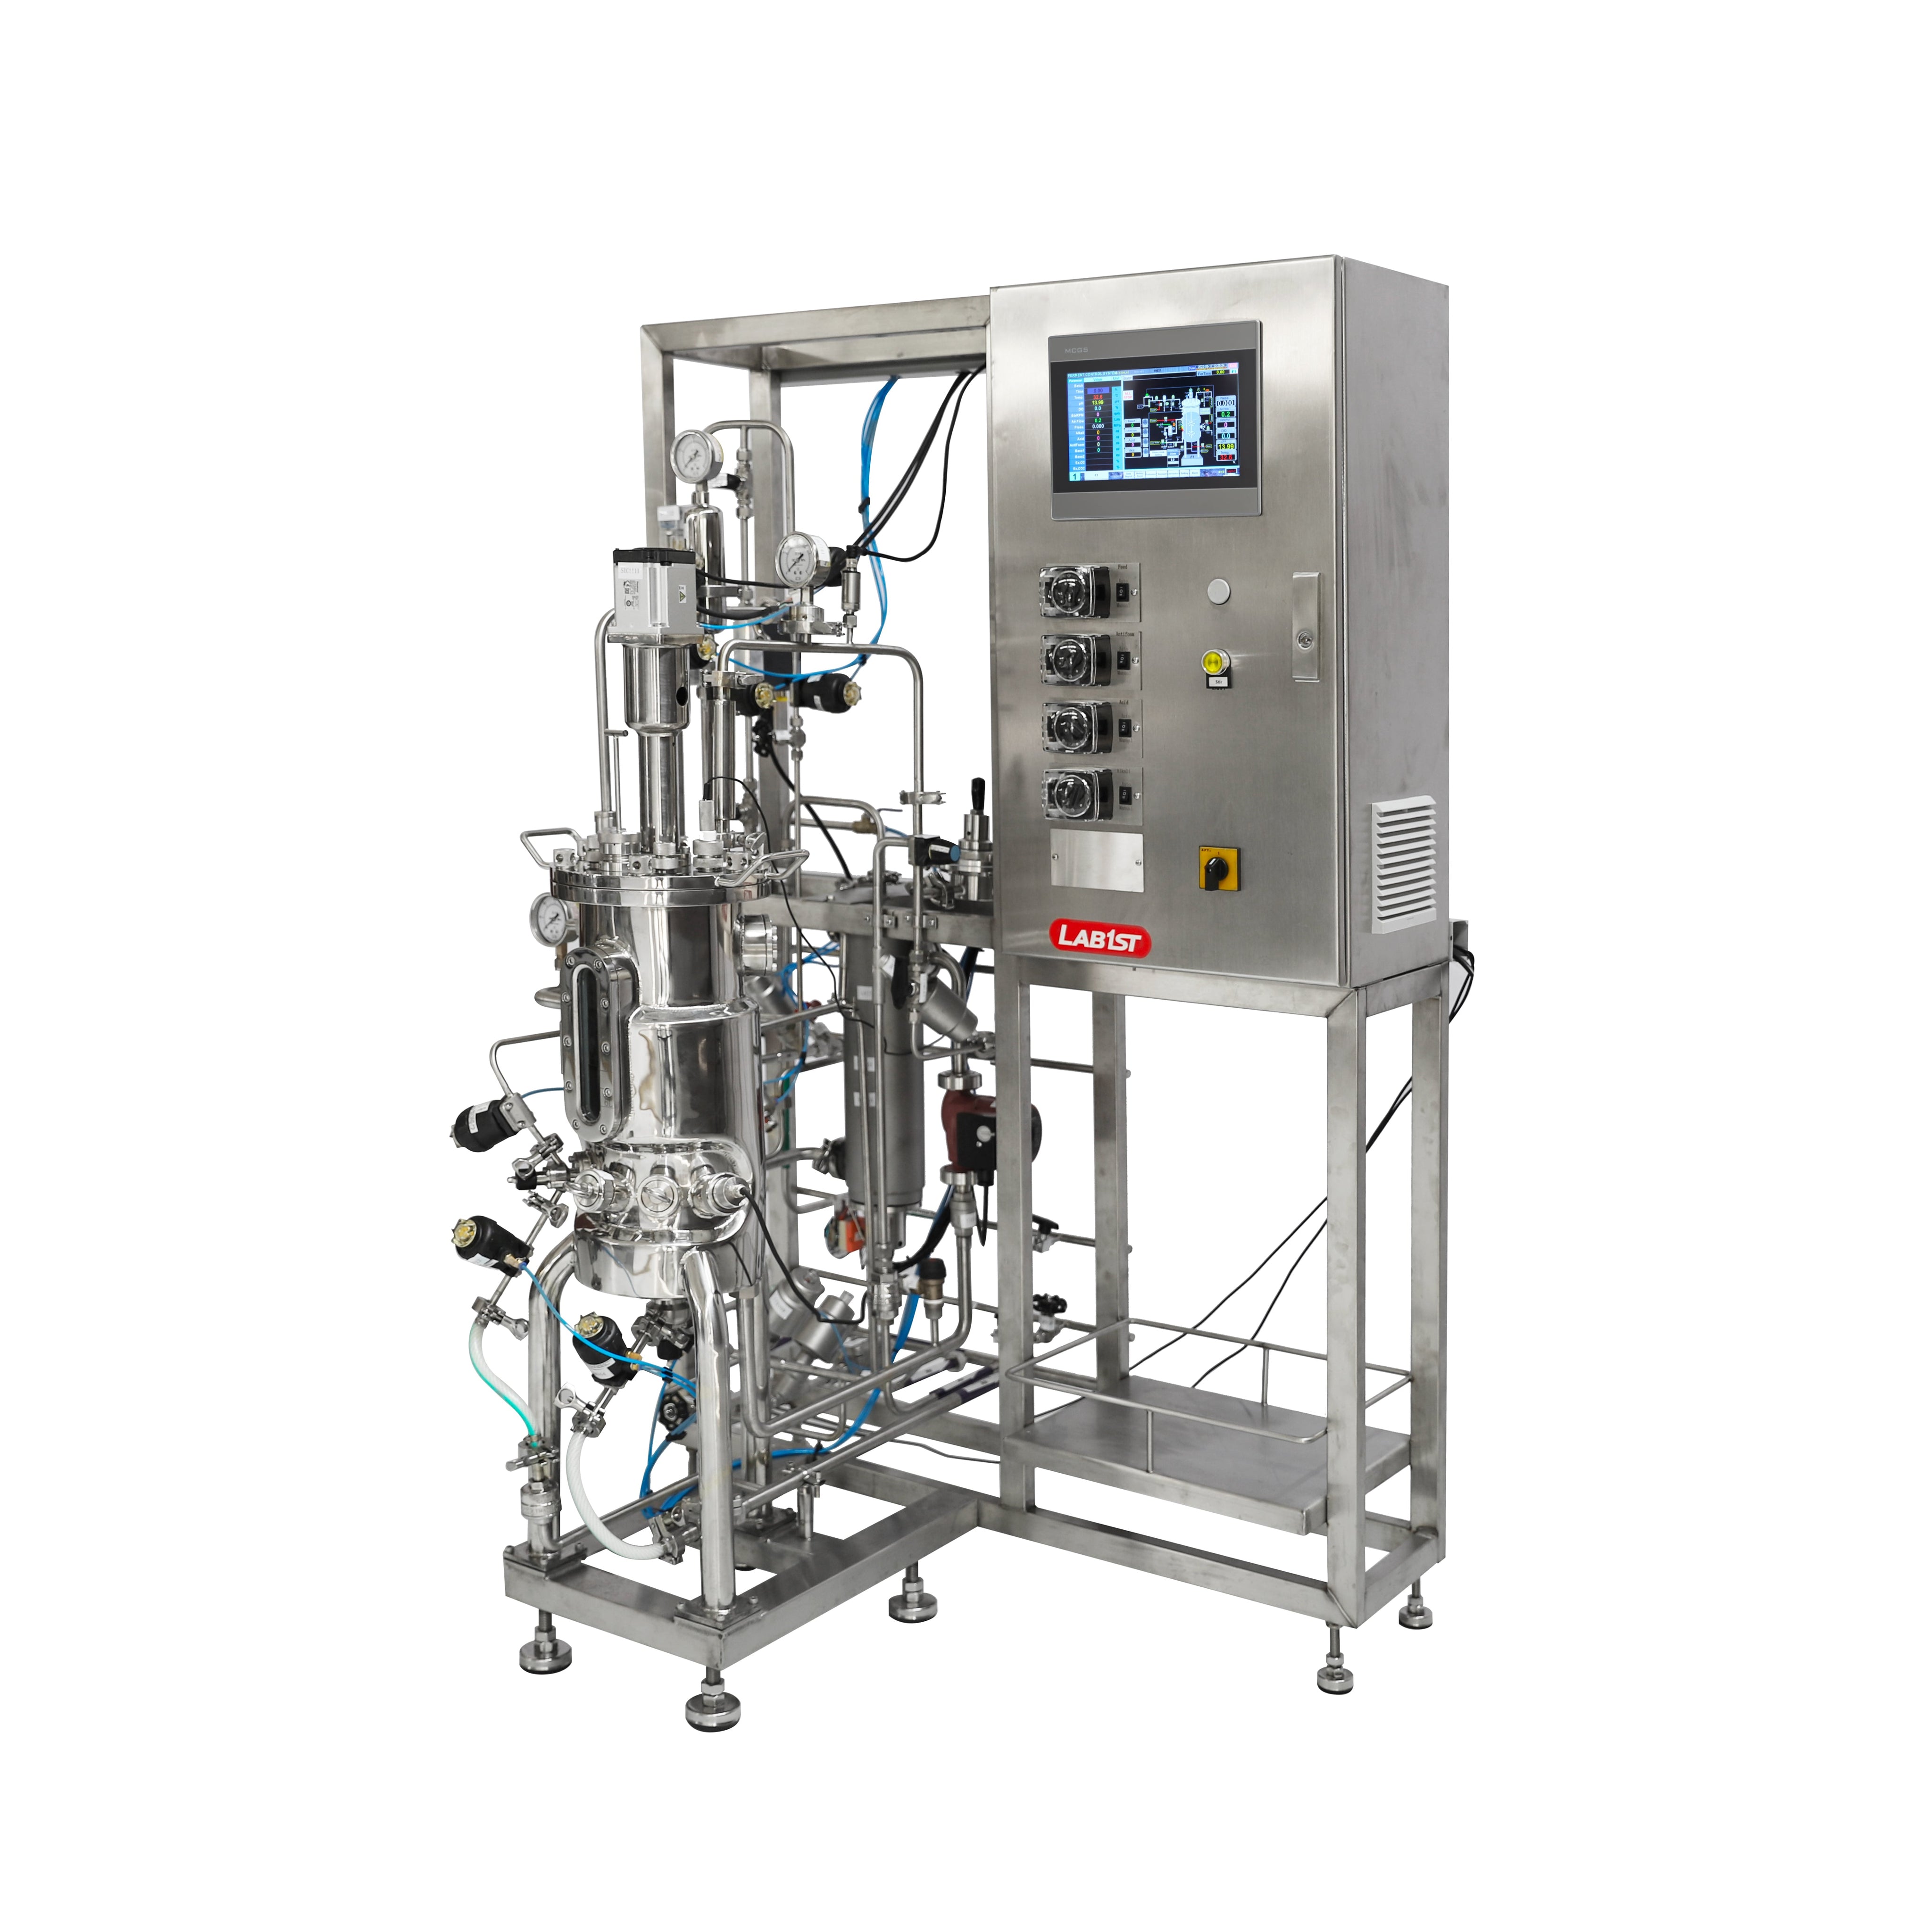 10L Stainless Steel Bioreactor for Microbial Fermentation with 2 Gas Inlets BR500-M1